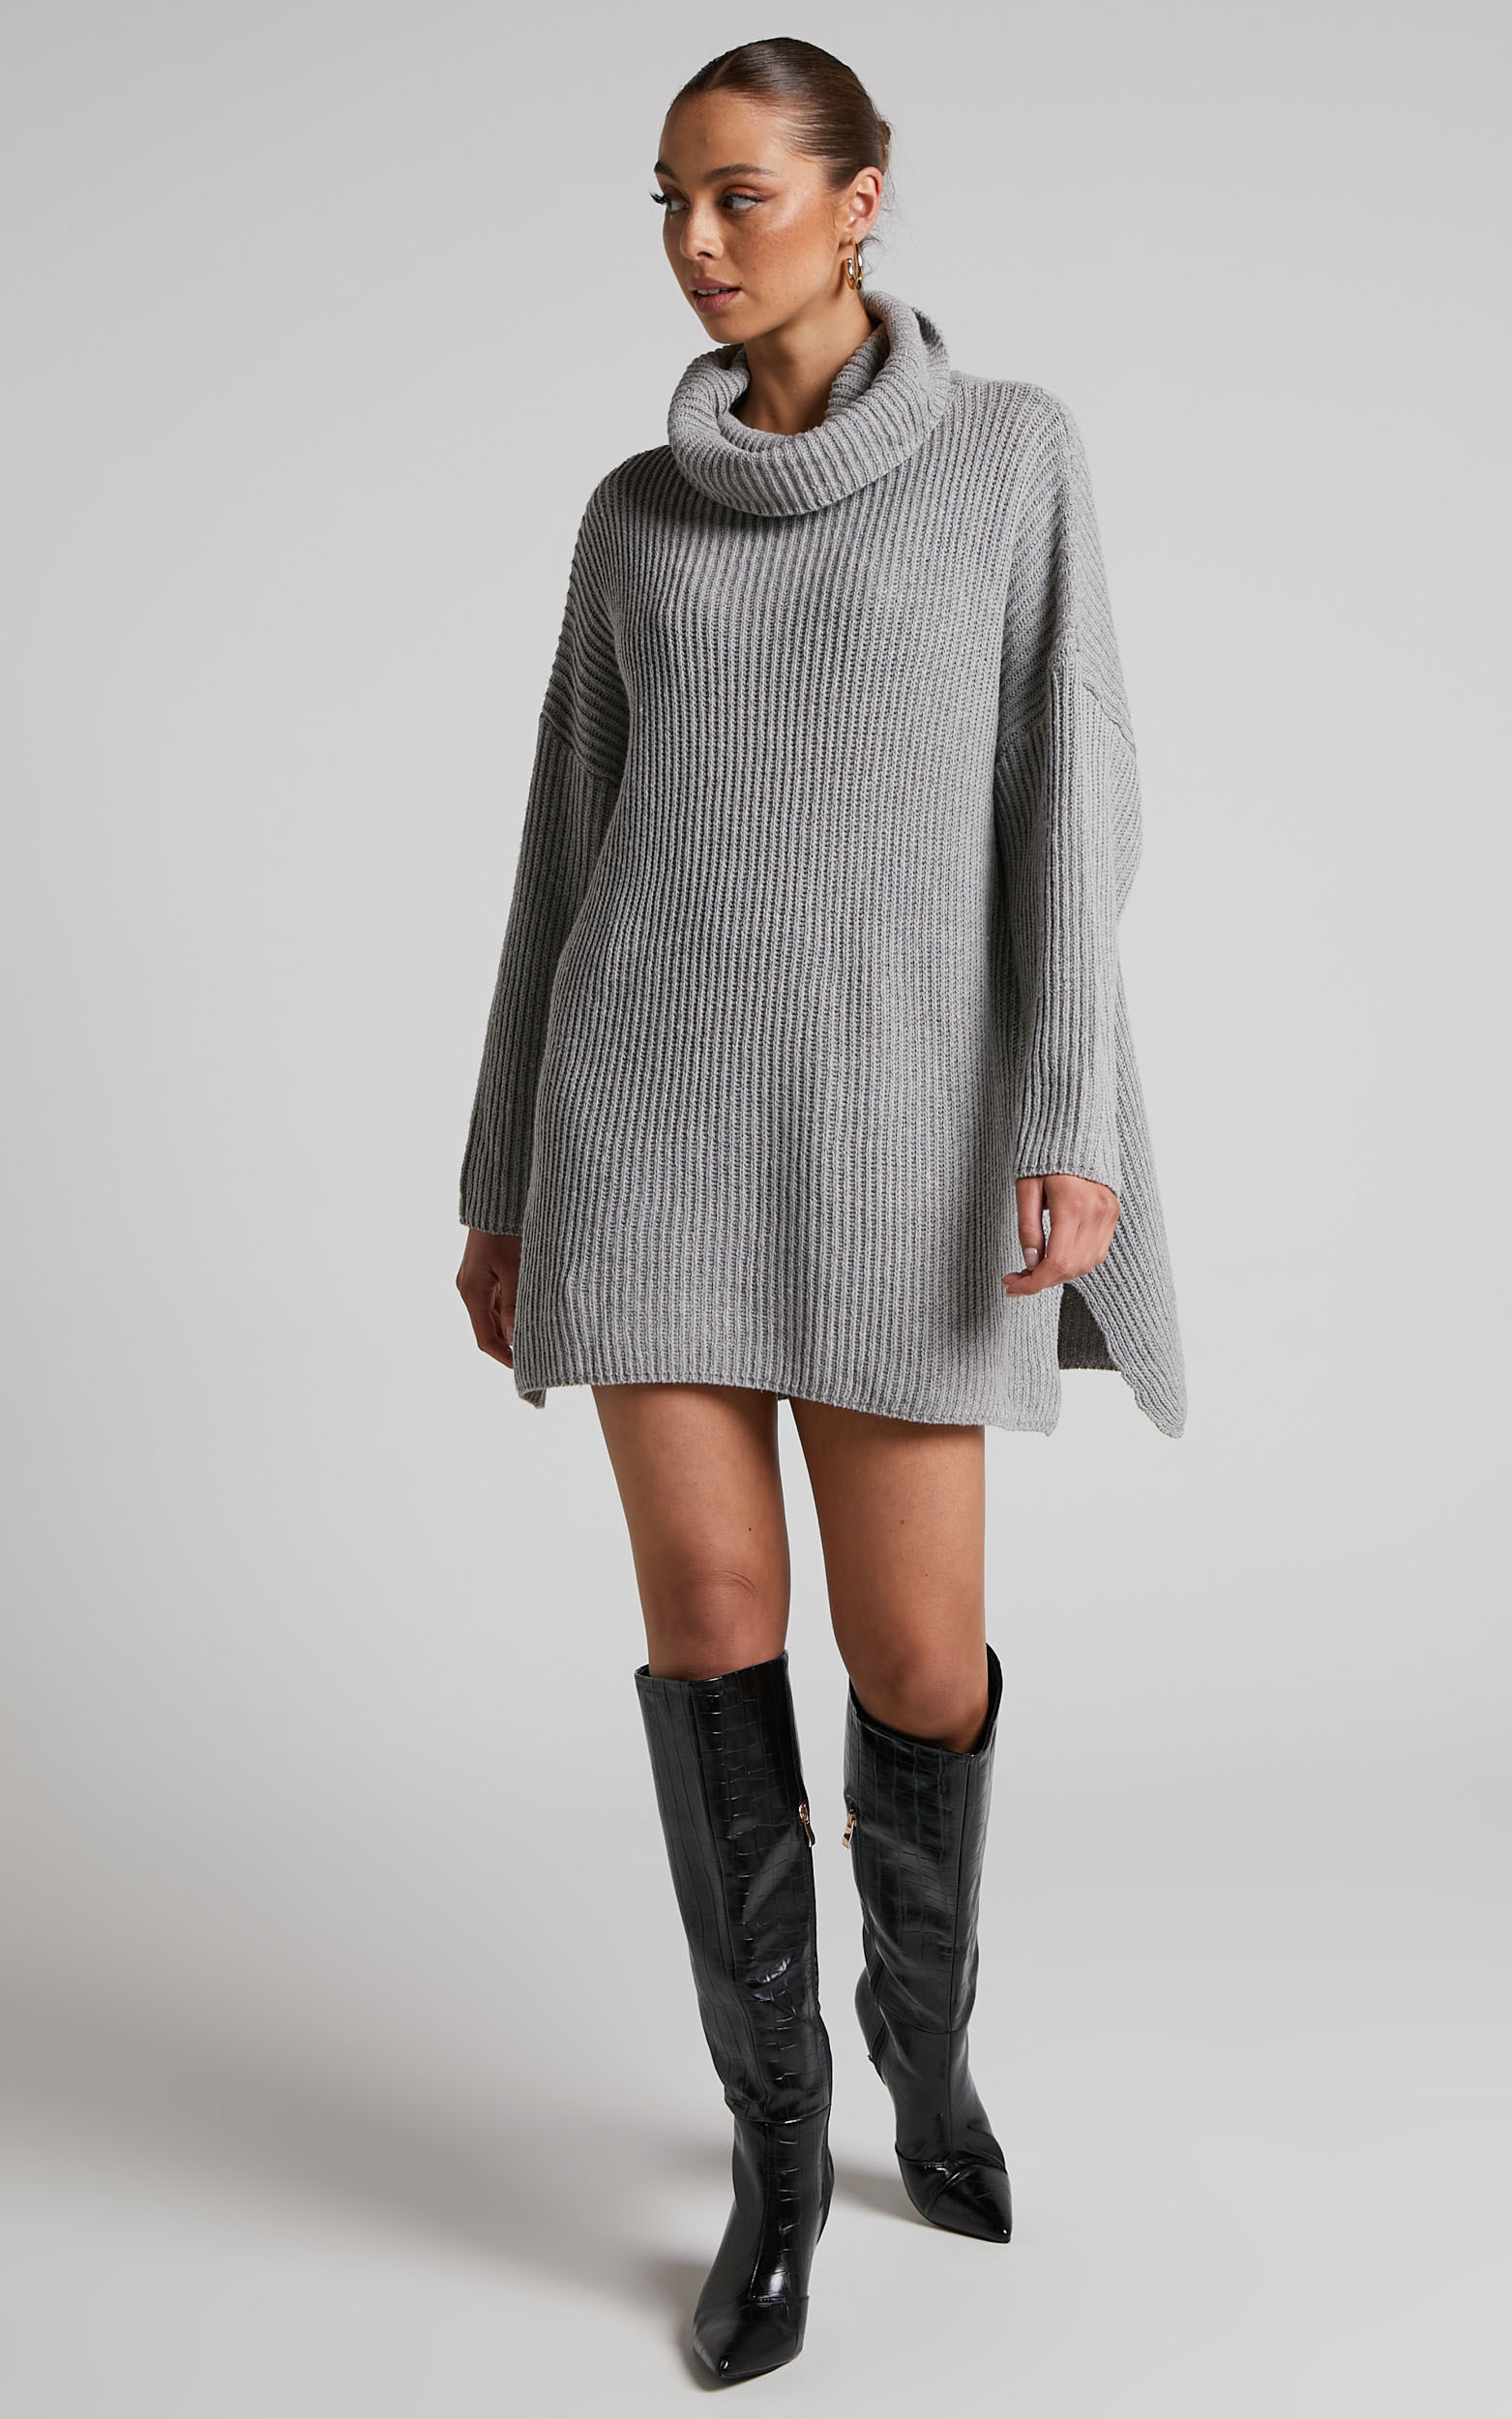 Ariene Jumper Dress - Oversized Turtle Neck Knit Dress in Grey - 06, GRY2, hi-res image number null